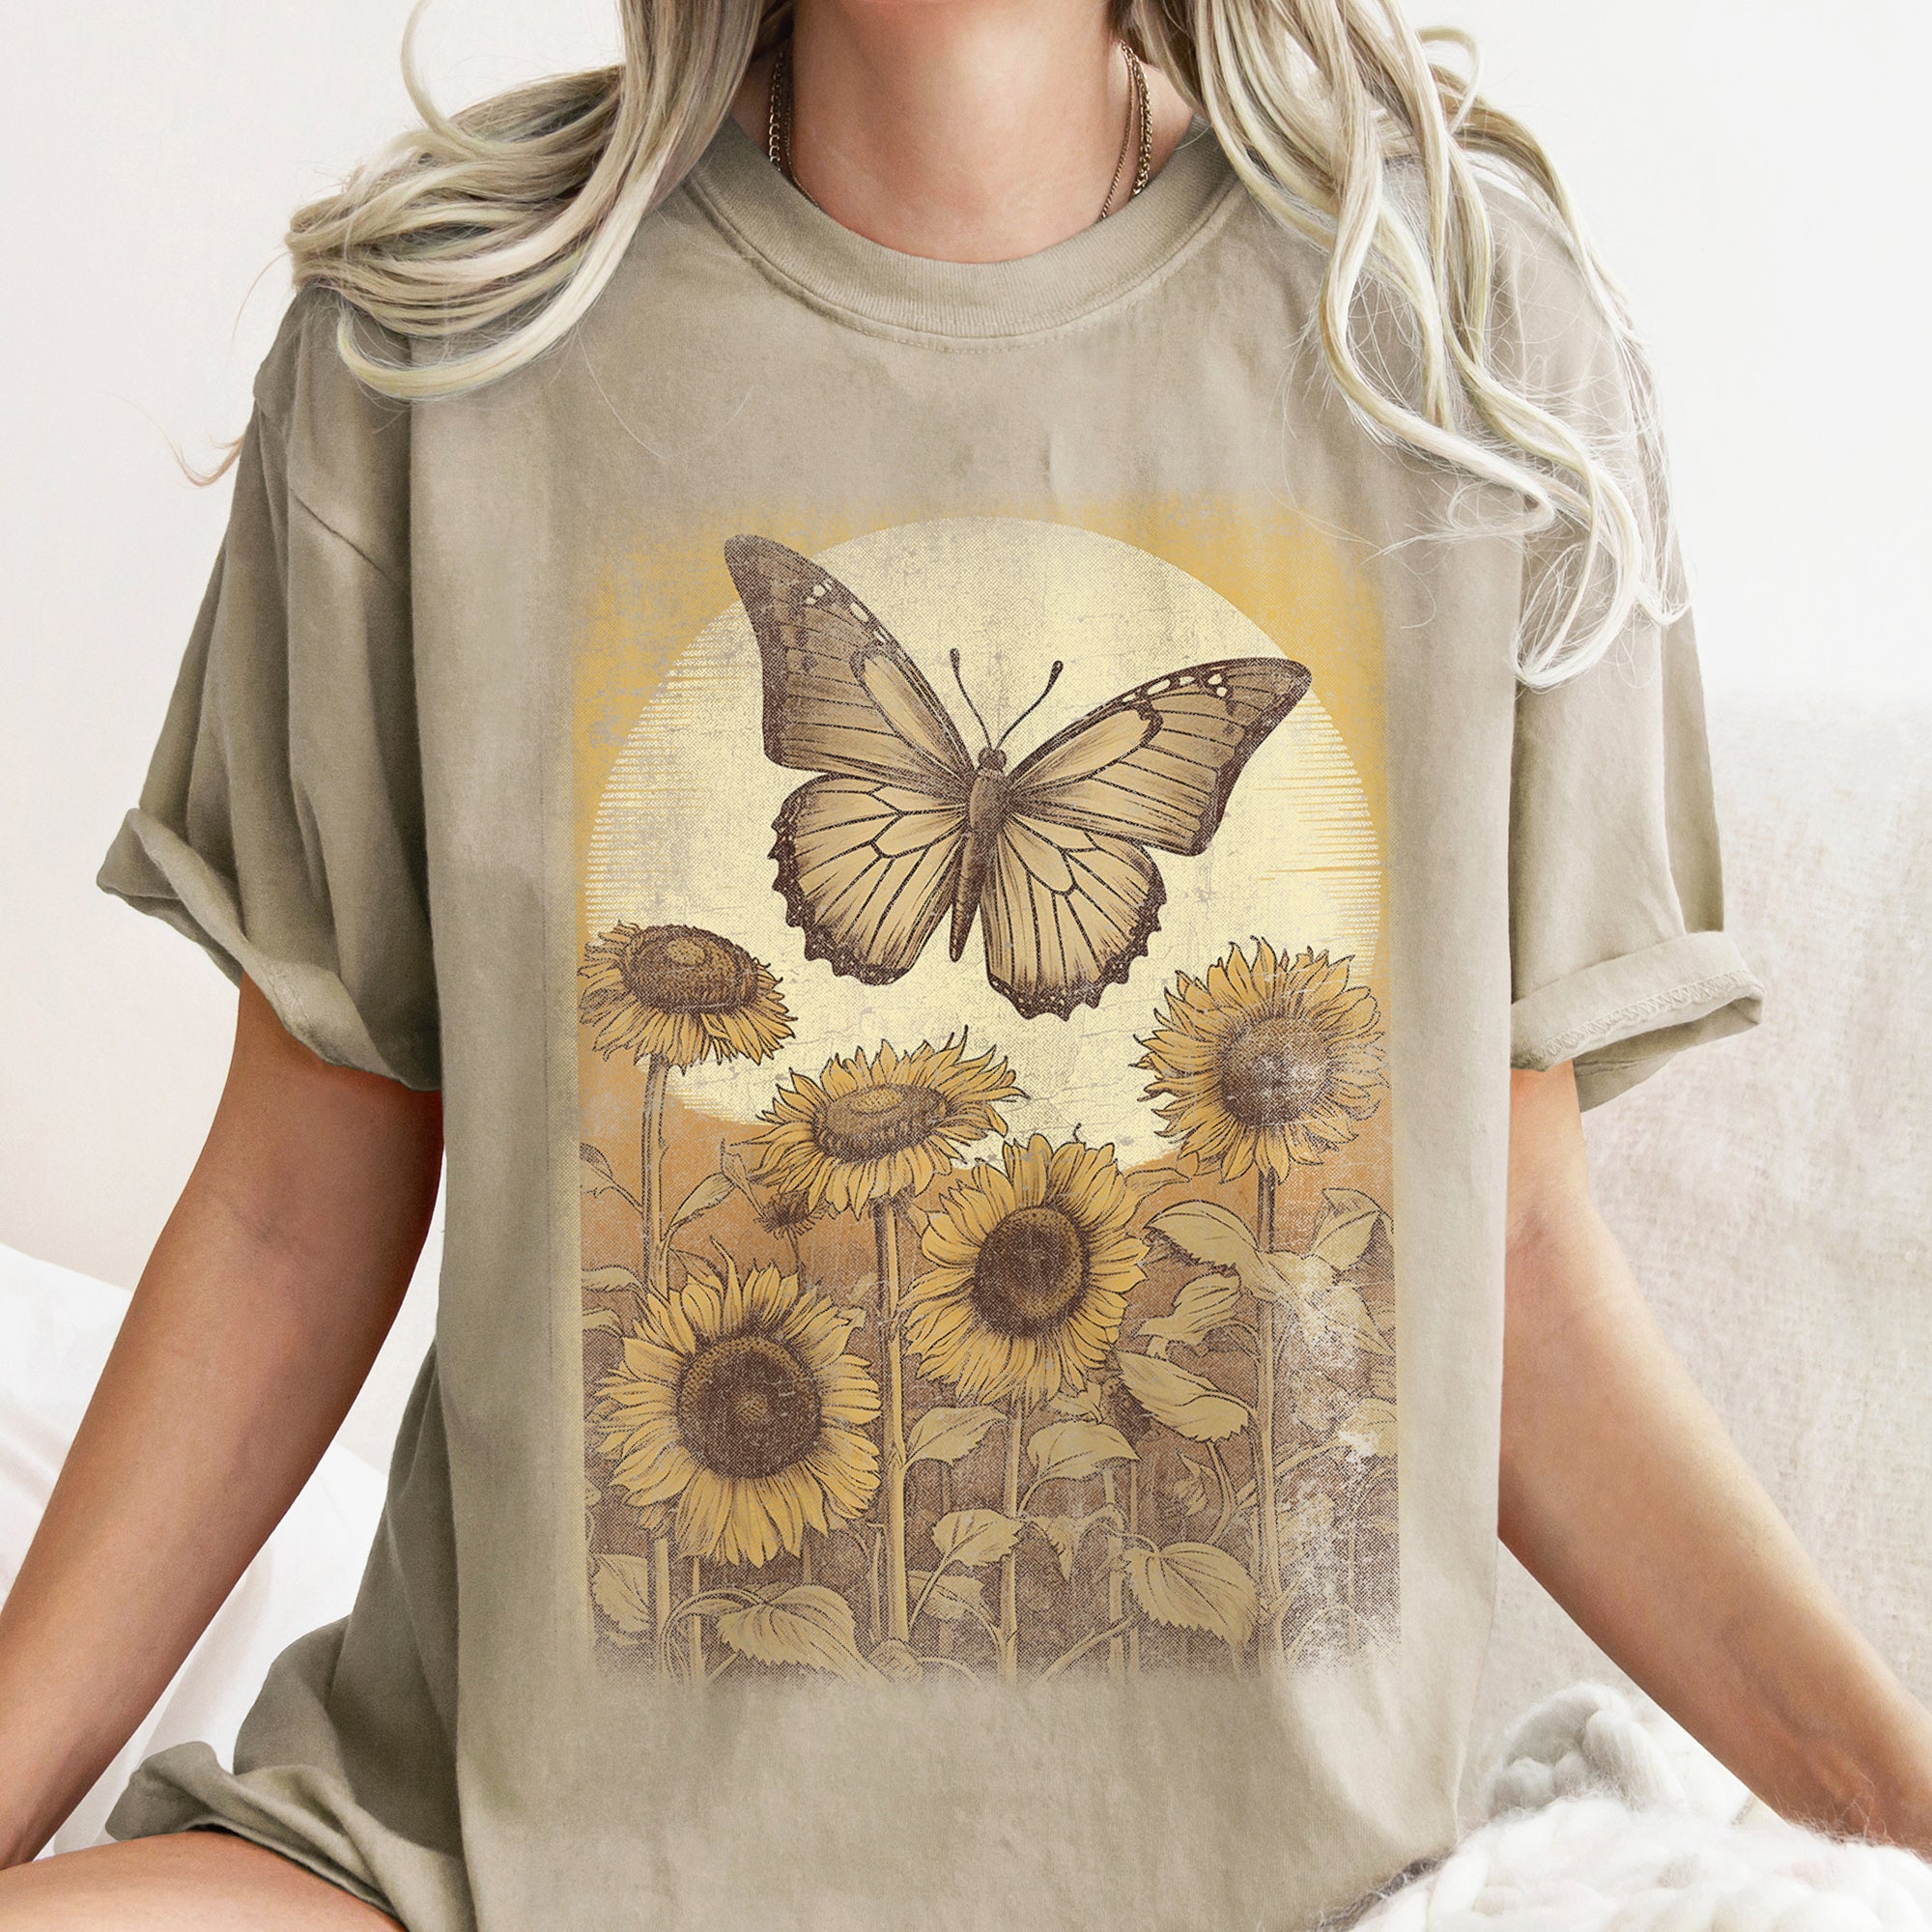 Vintage Butterfly Sunflowers T-shirt